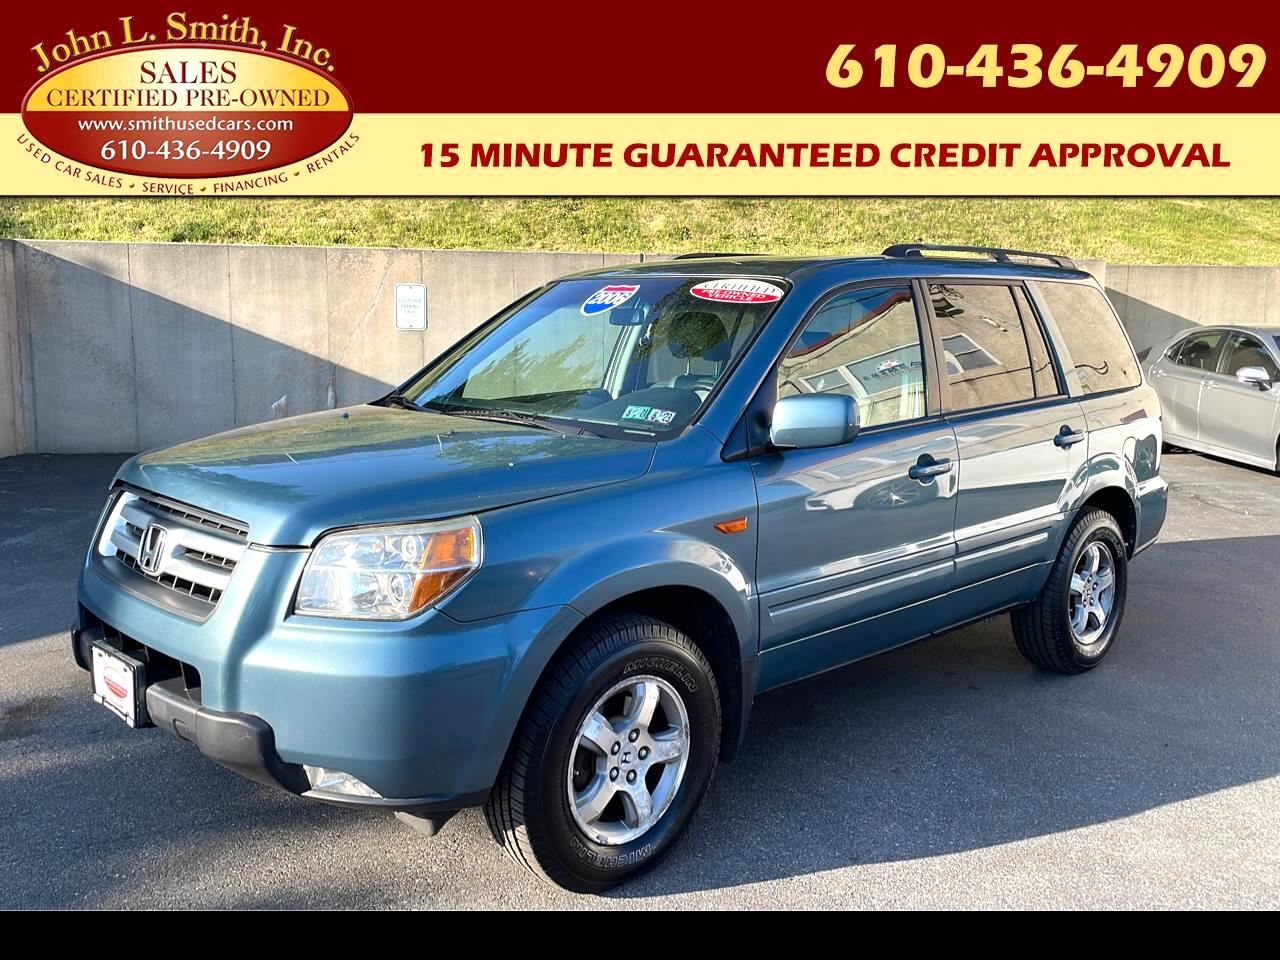 2006 Honda Pilot EX 4WD w/Leather and Navigation